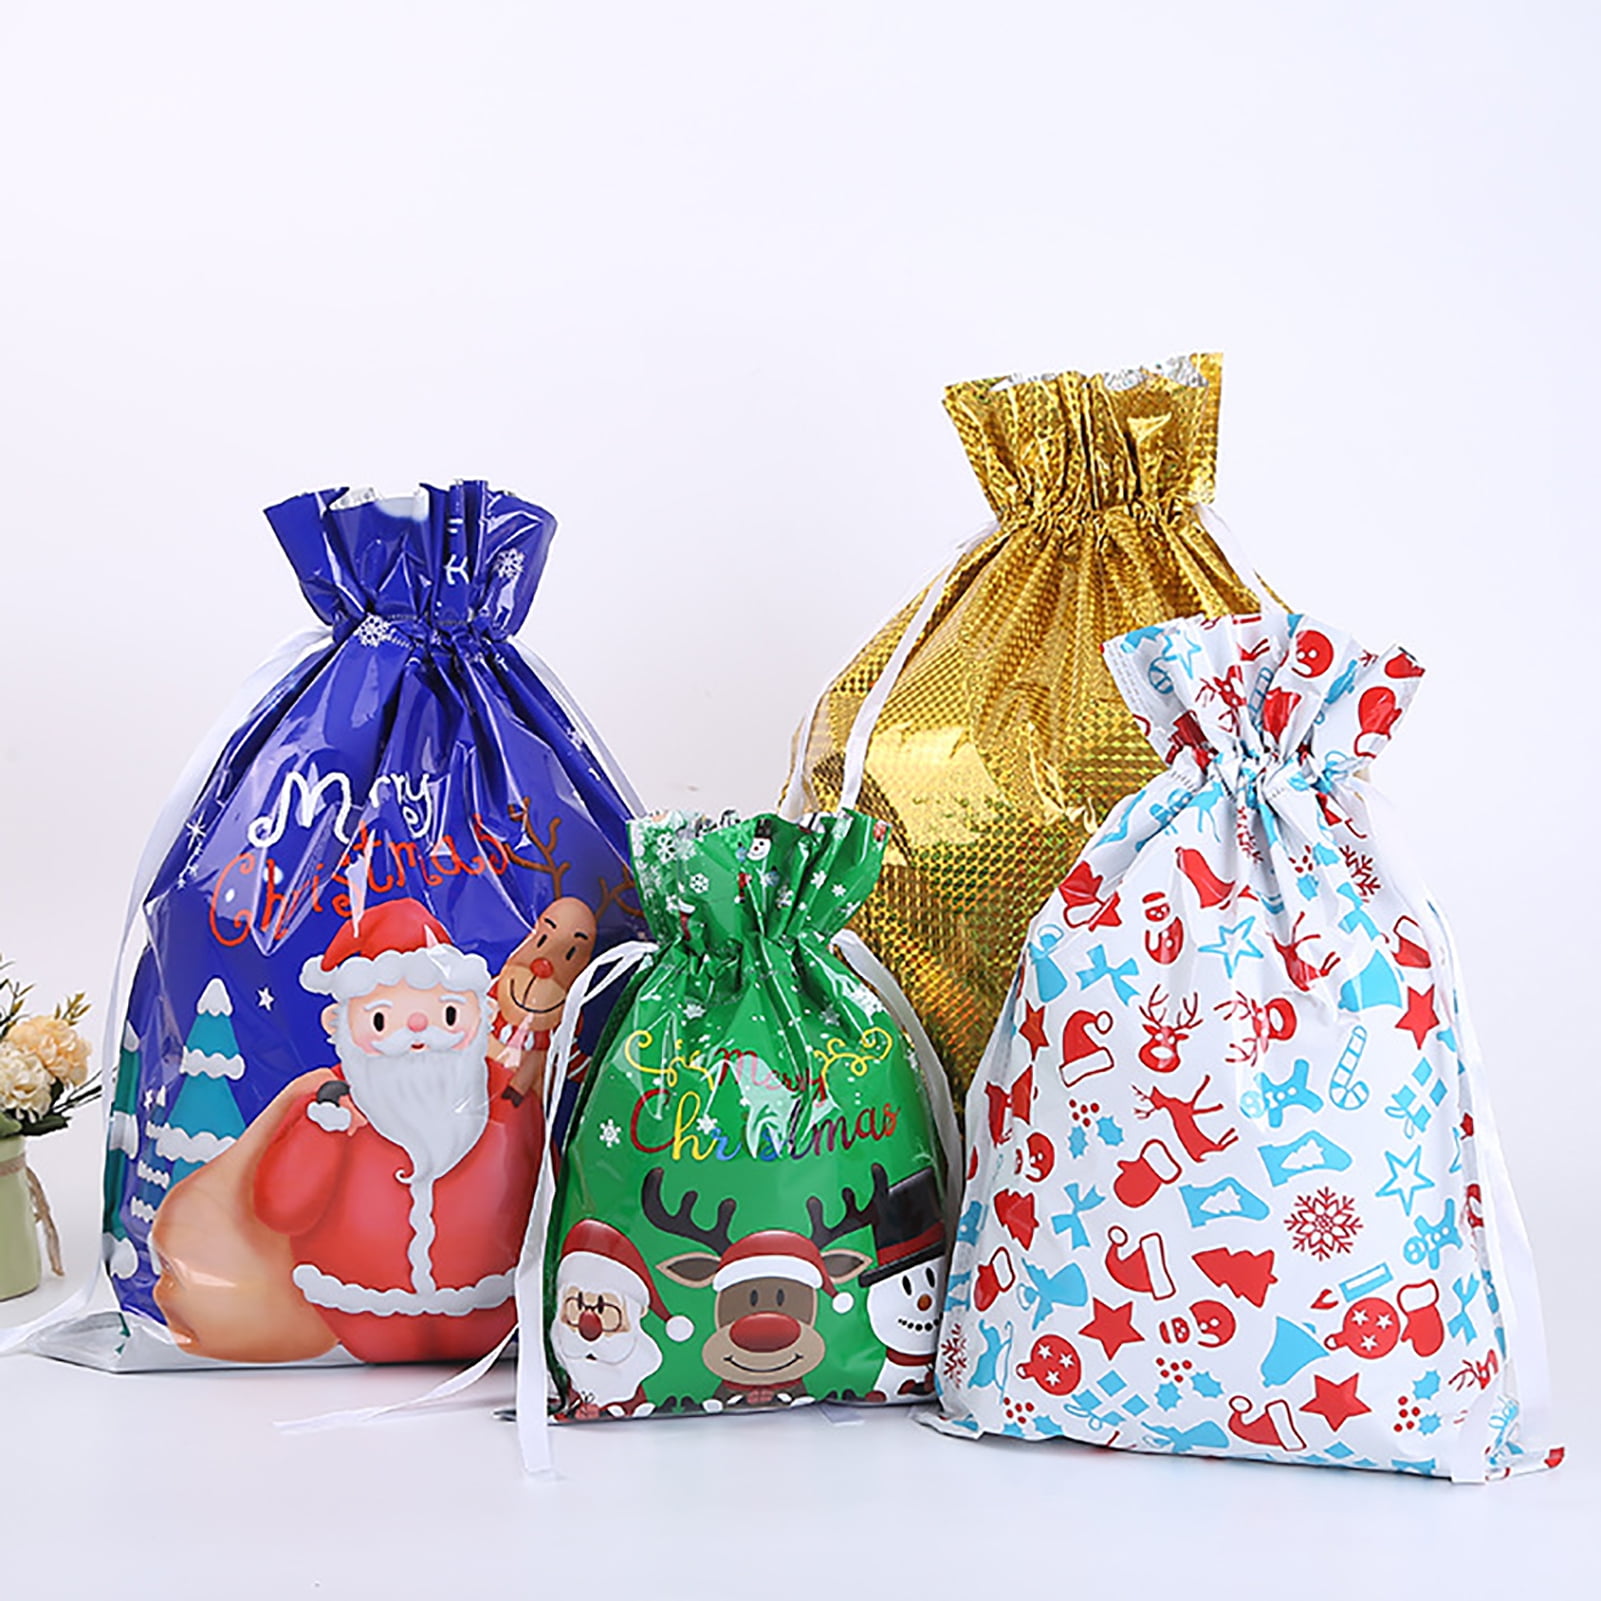 Details about   Pack Of 2 Pcs Xmas Large Drawstring Sack Christmas Party Favor-XM-PRCHSG16A 